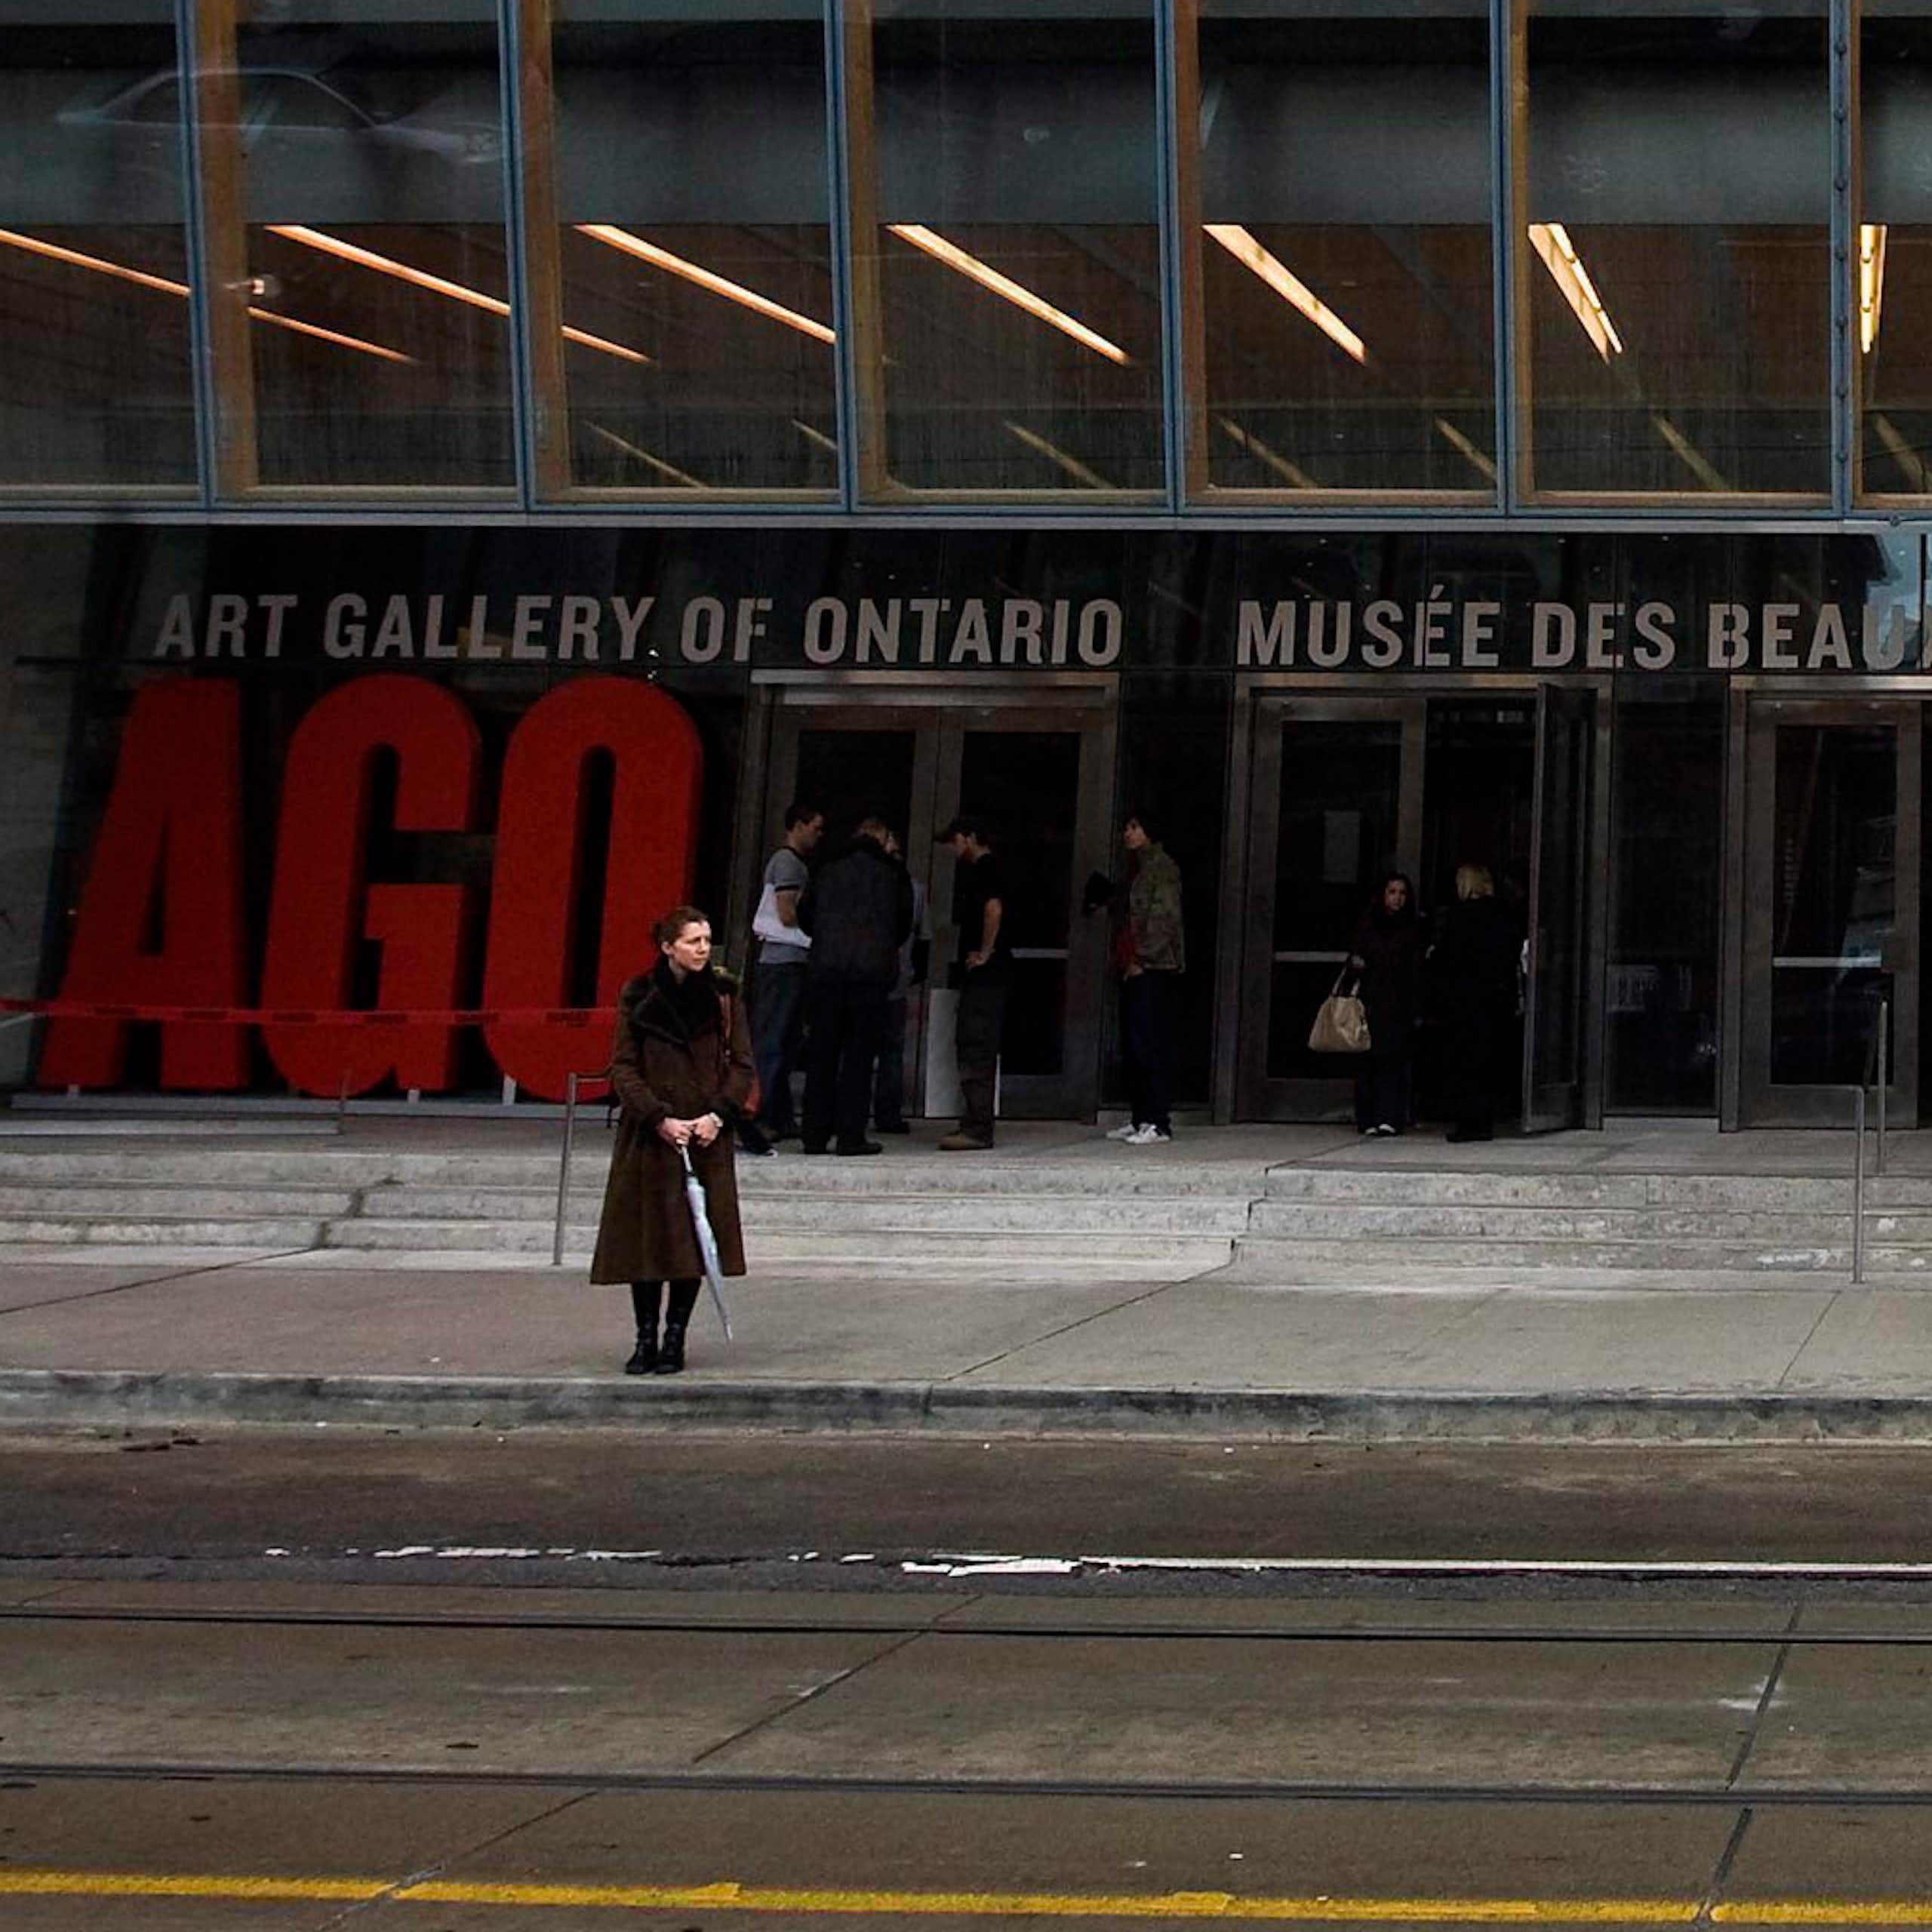 A person with umbrella seen in front of a building with wide steps and many glass panes that says Art Gallery of Ontario.